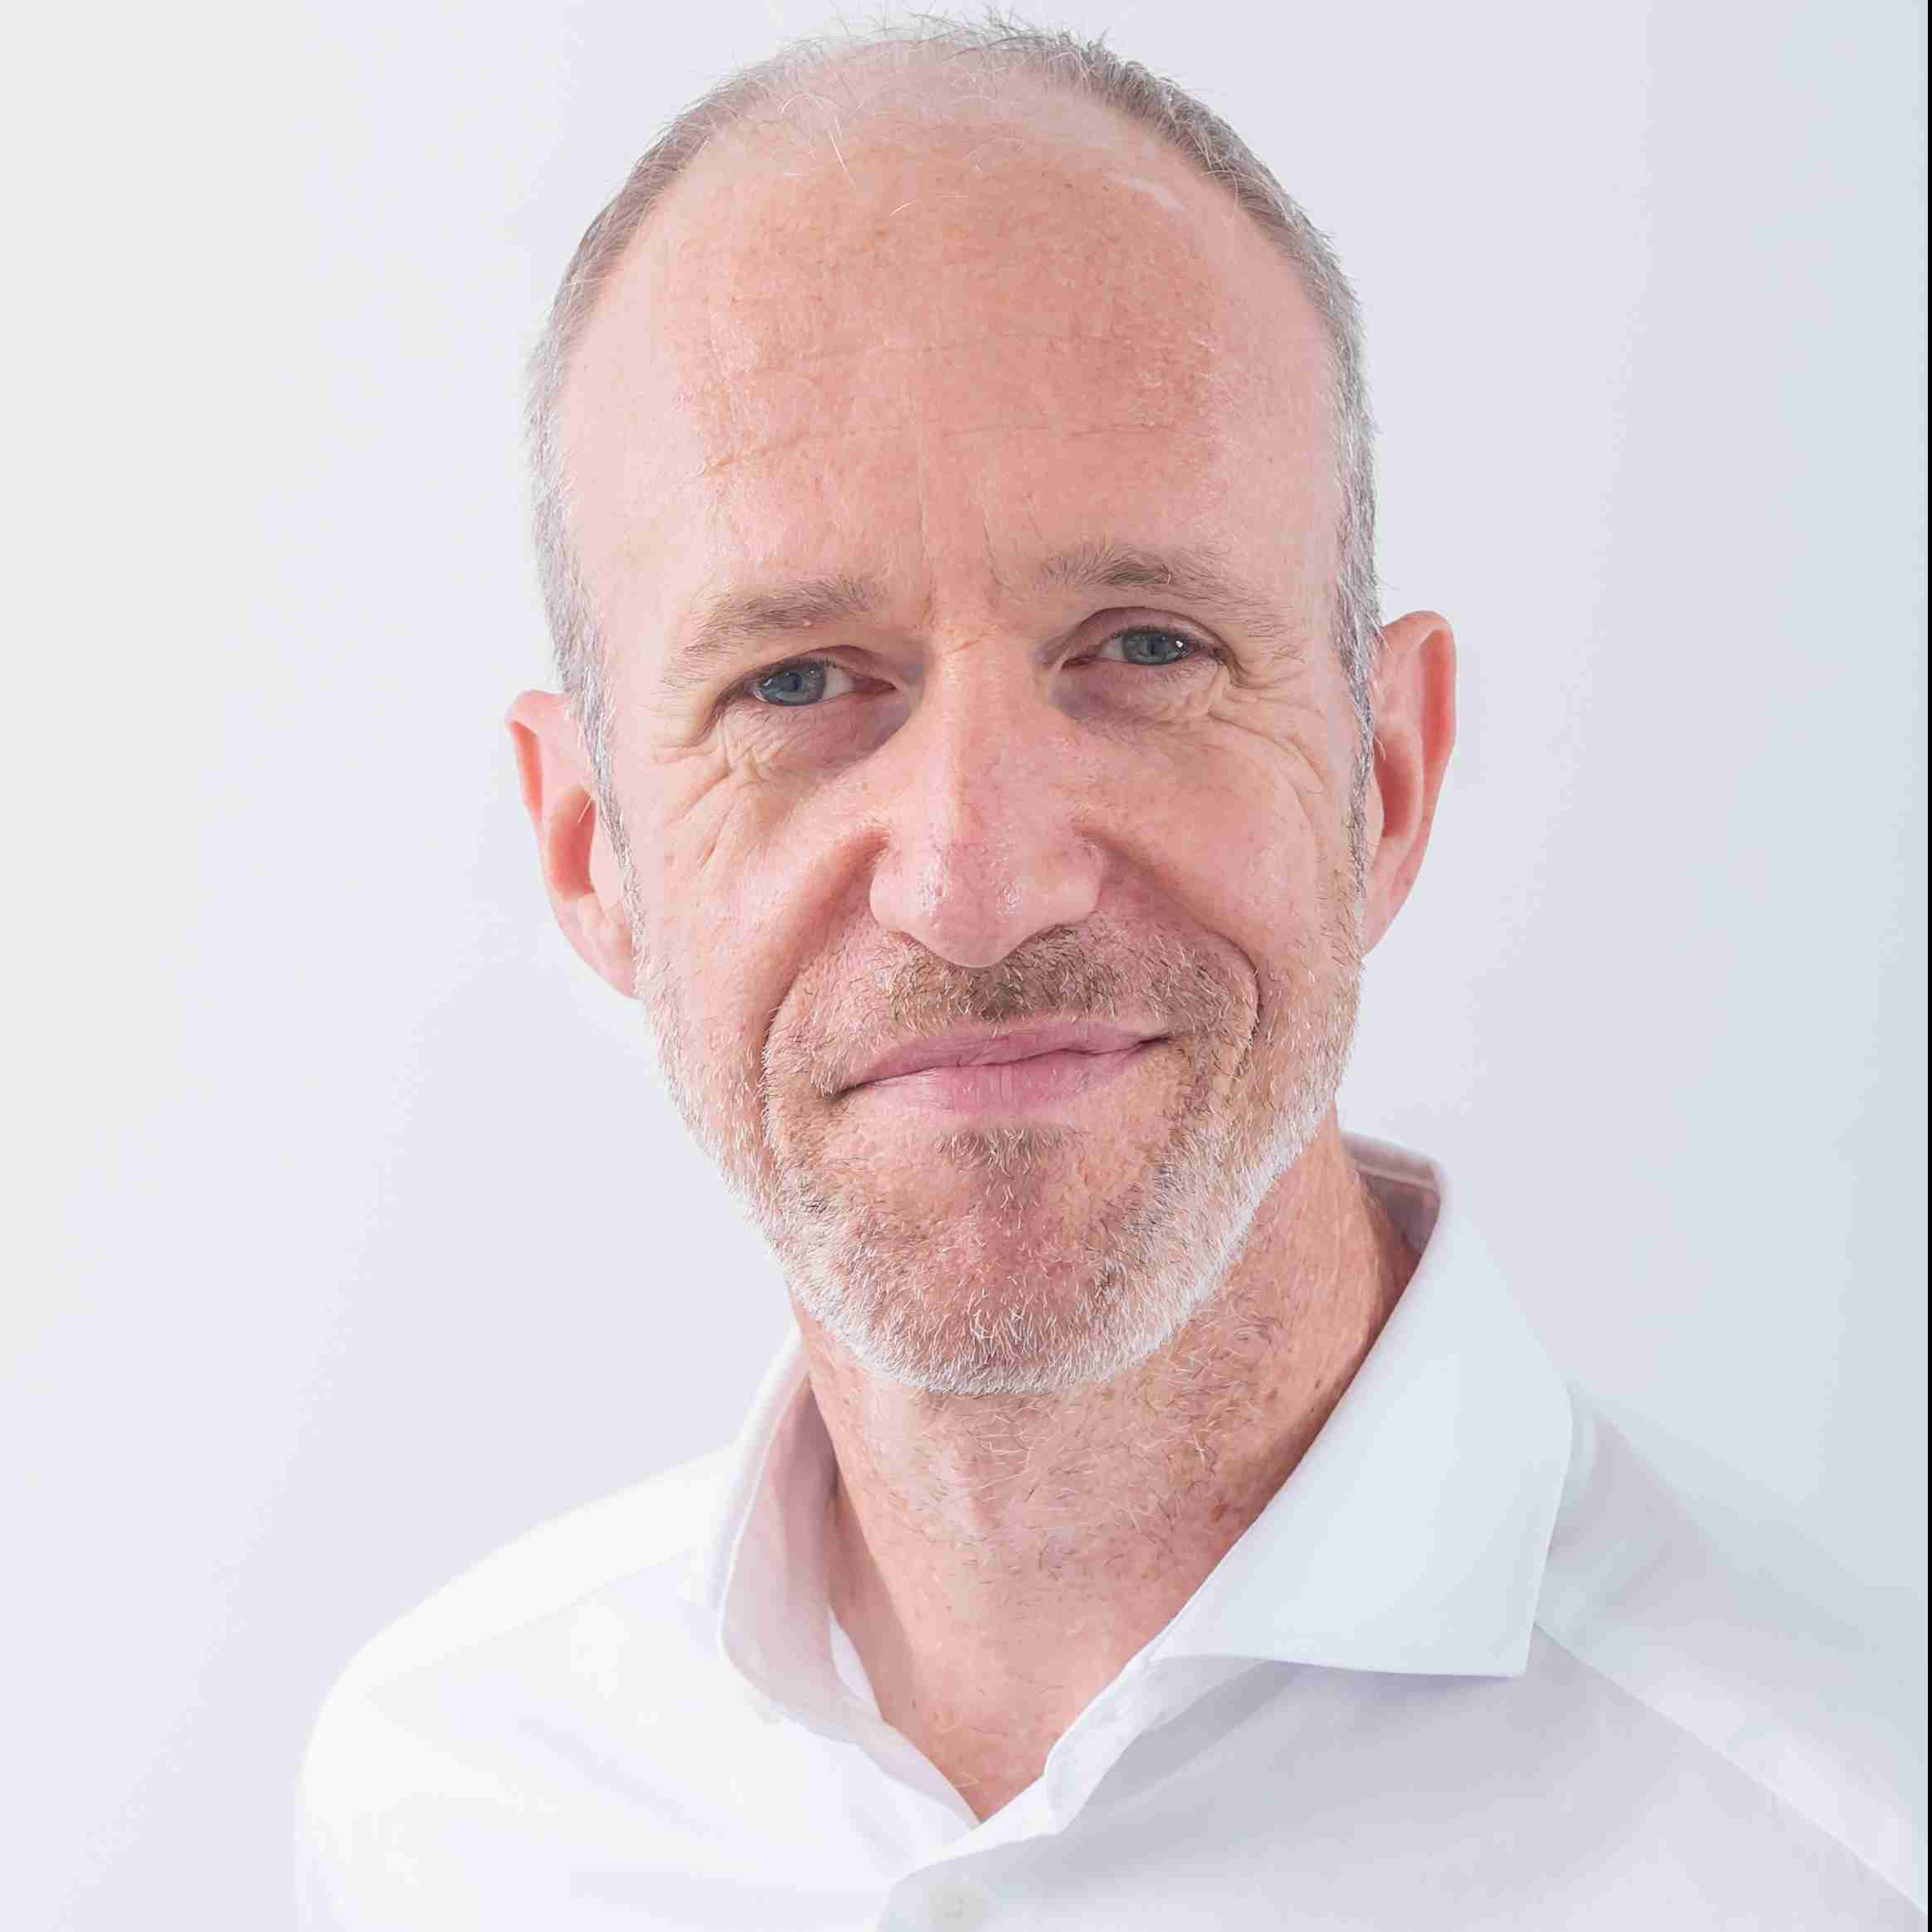 Profile image of Dr Neil Malone